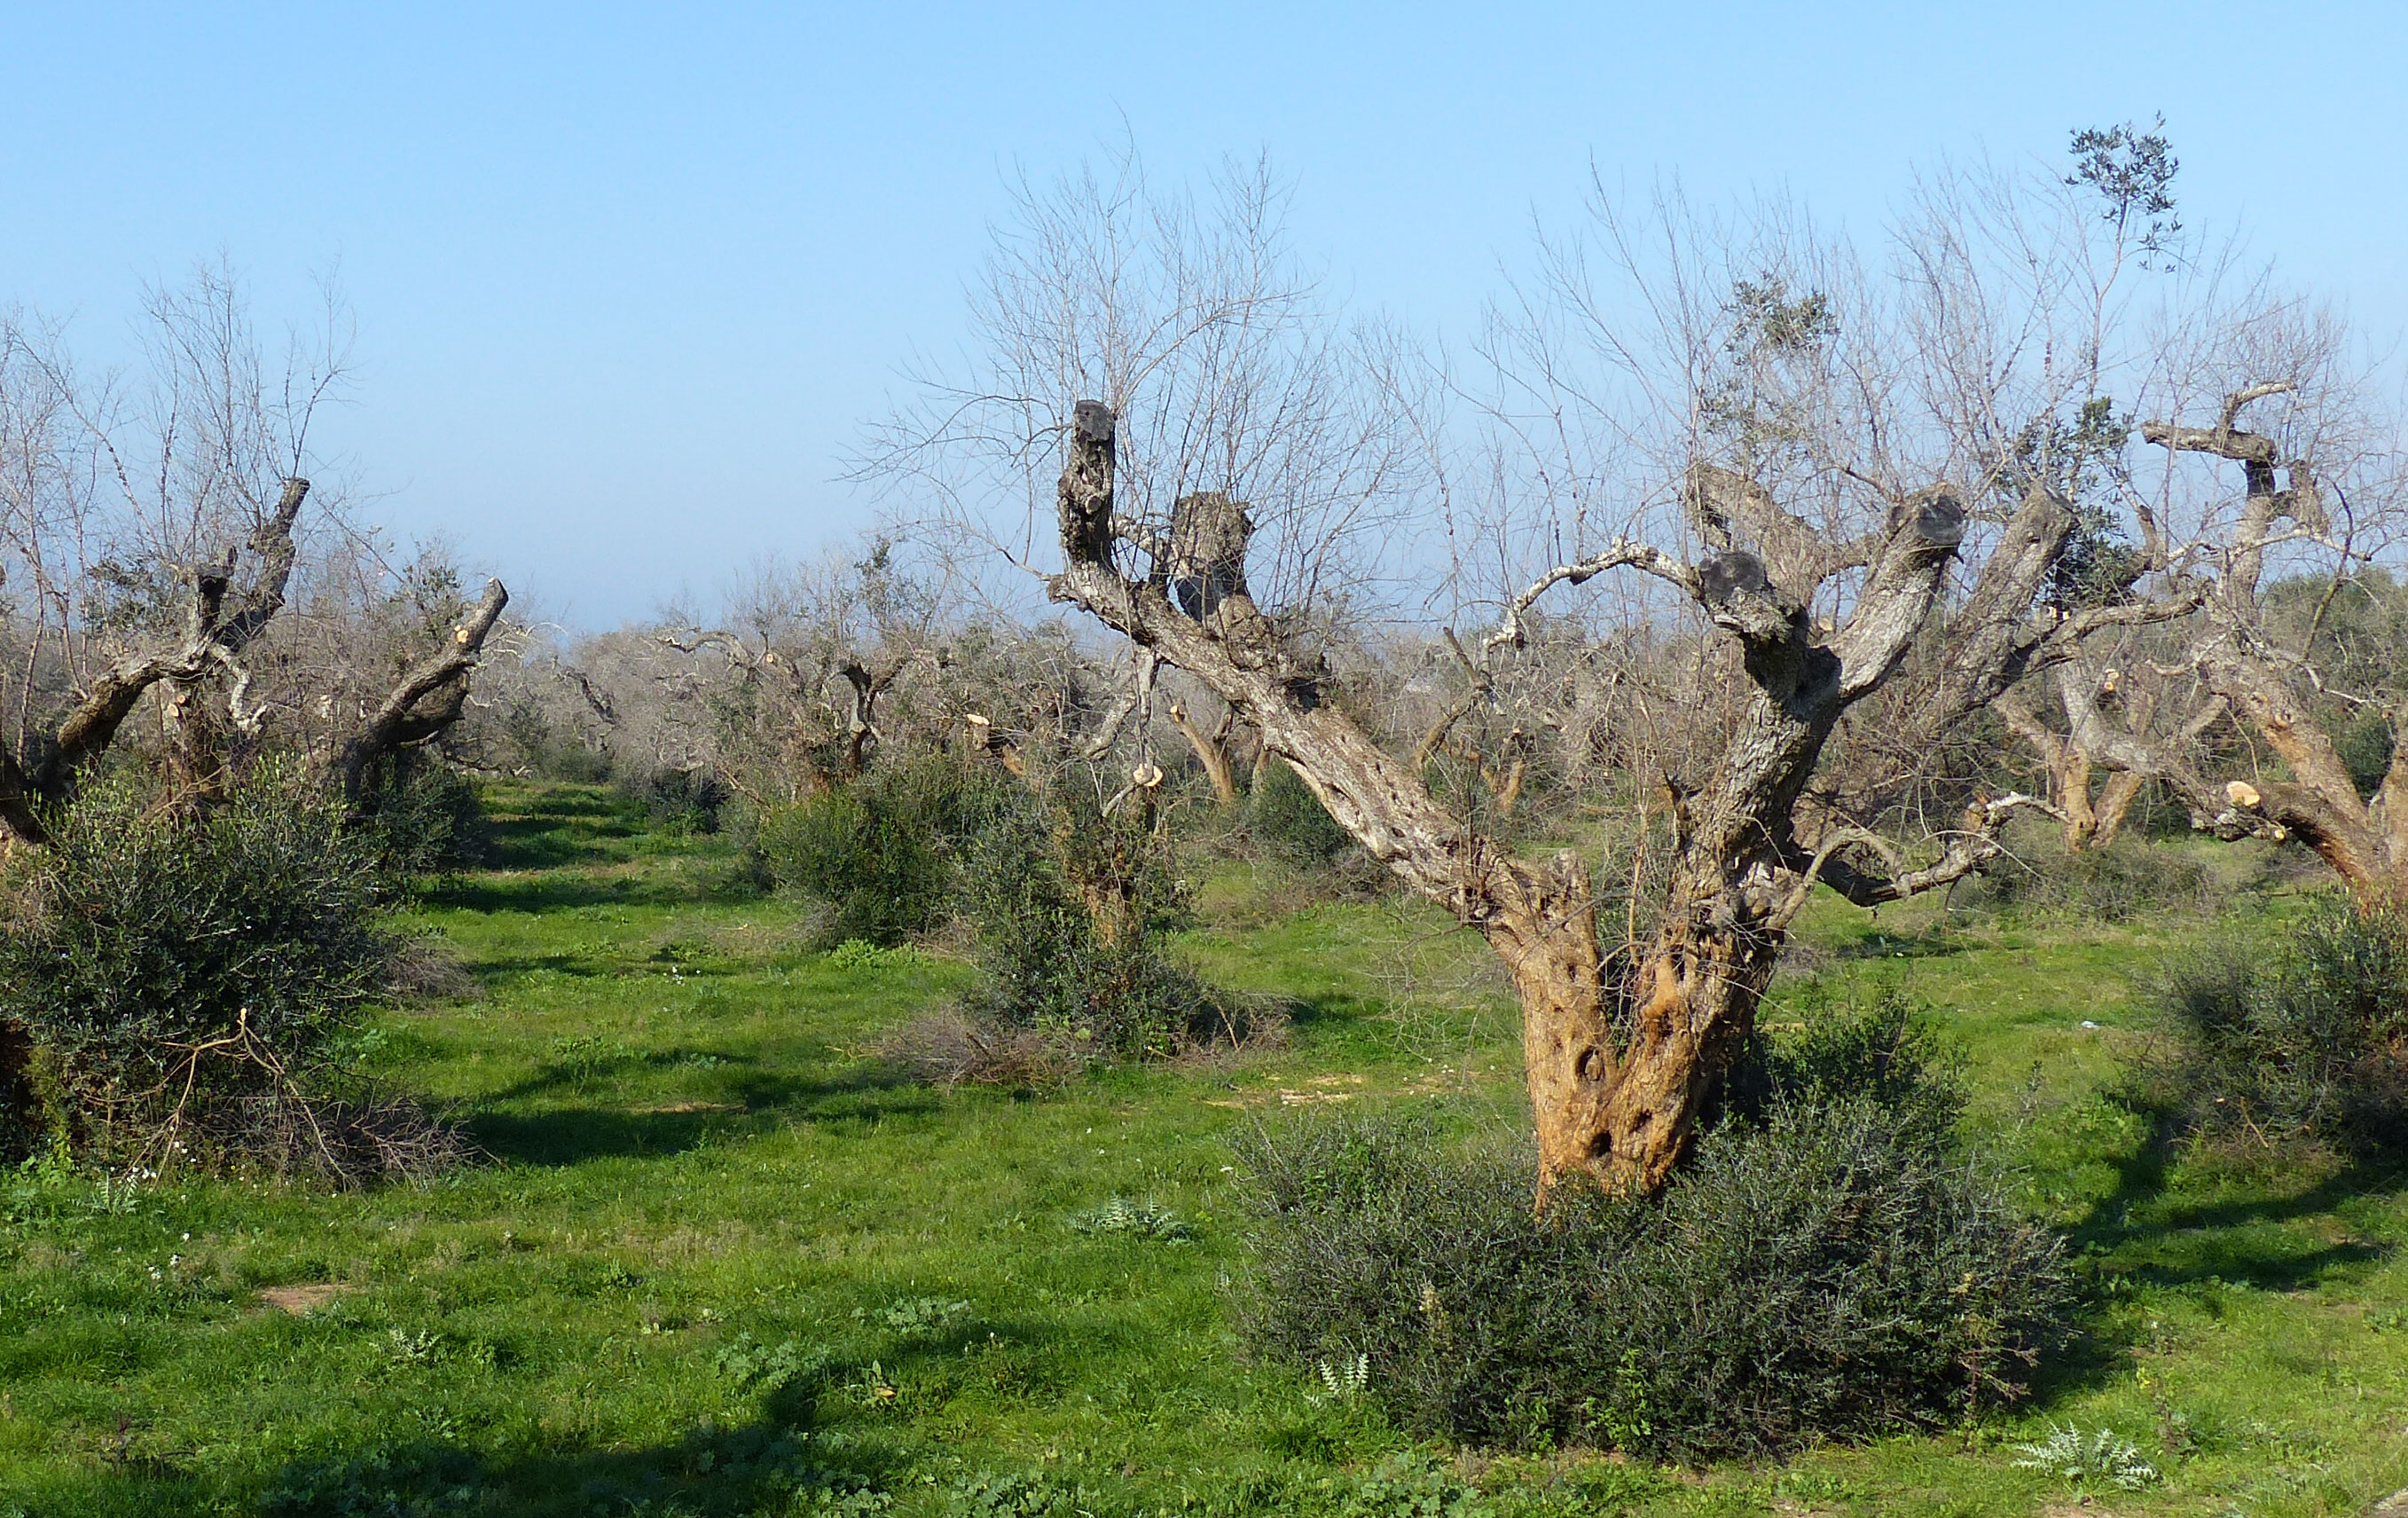 An orchard of olive trees infected by Xylella fastidiosa.